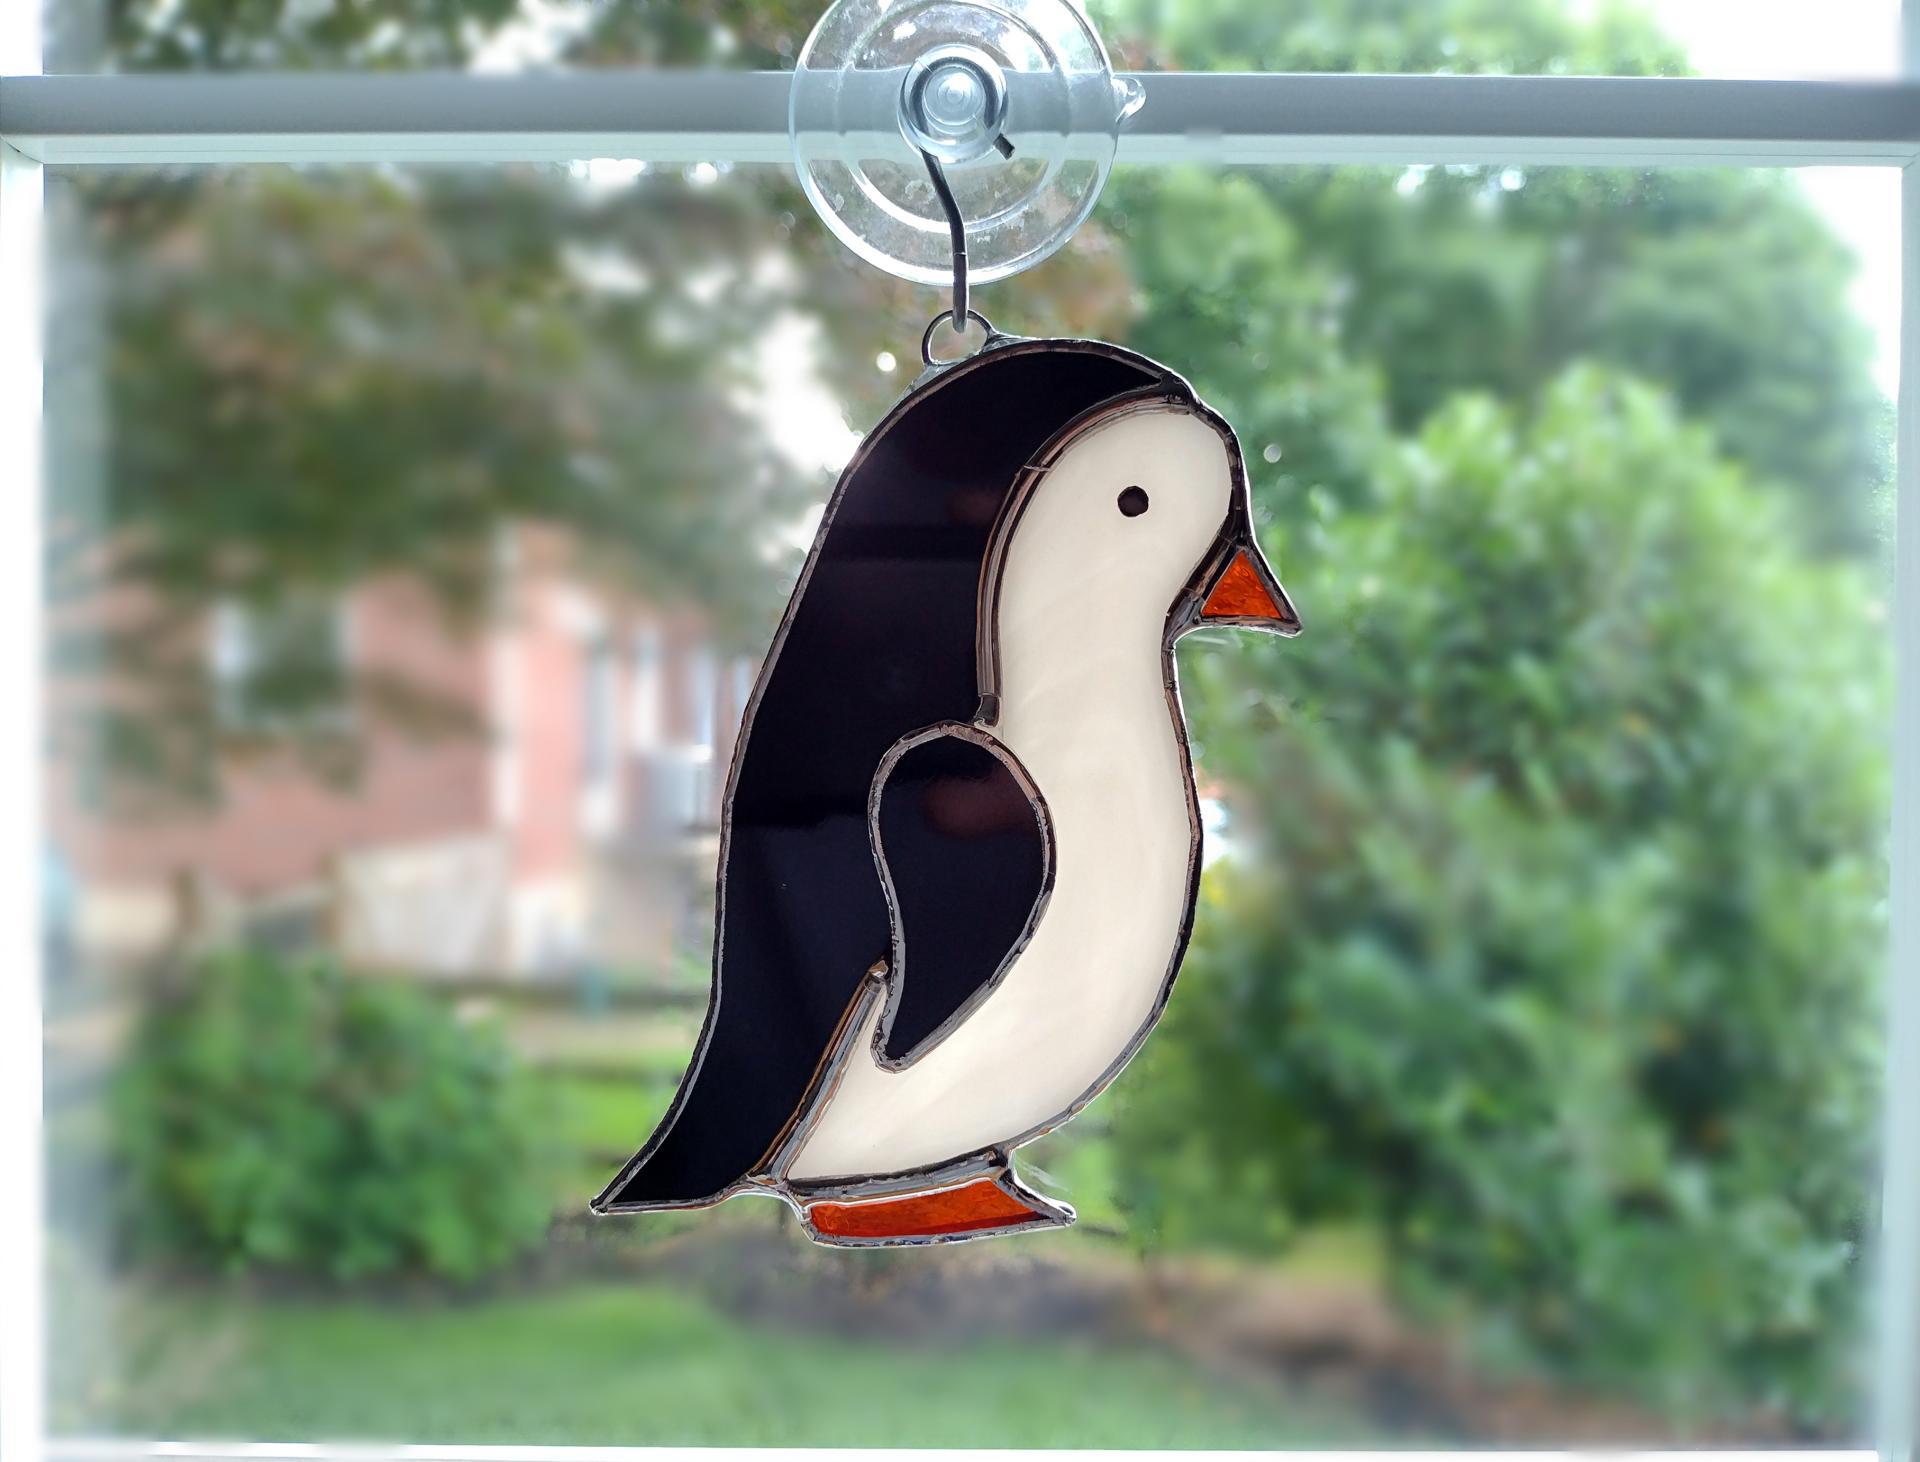 stained glass penguin available with a boy face or girl face, measures five inches by four inches and comes with a suction cup hanger.